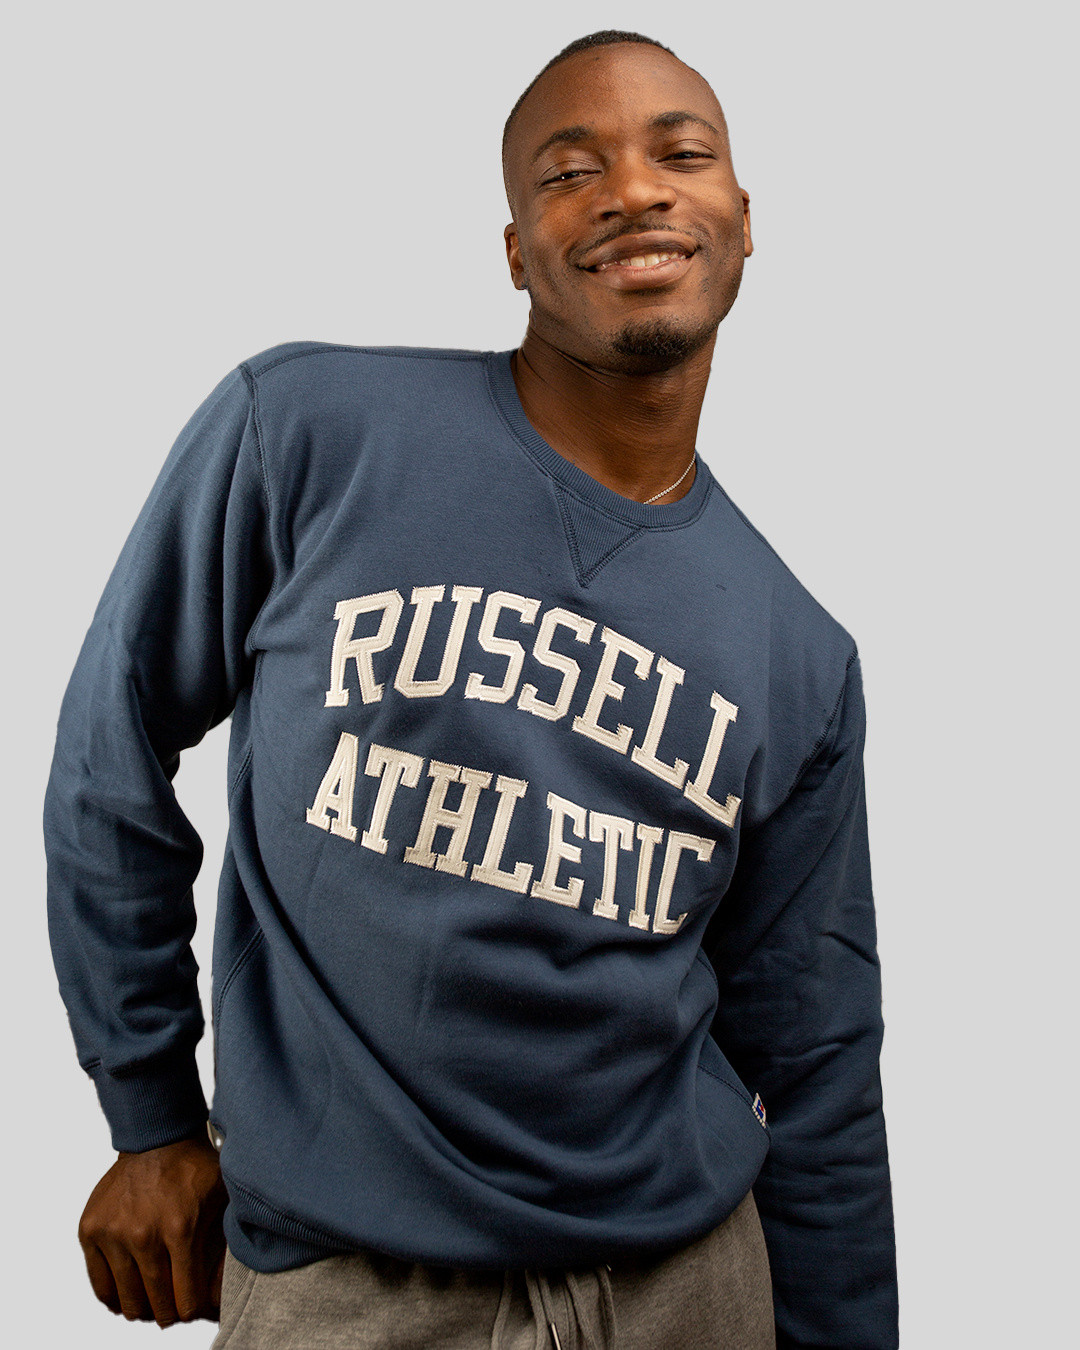 Russell Athletic - Felpa con ricamo, Blu, large image number 2